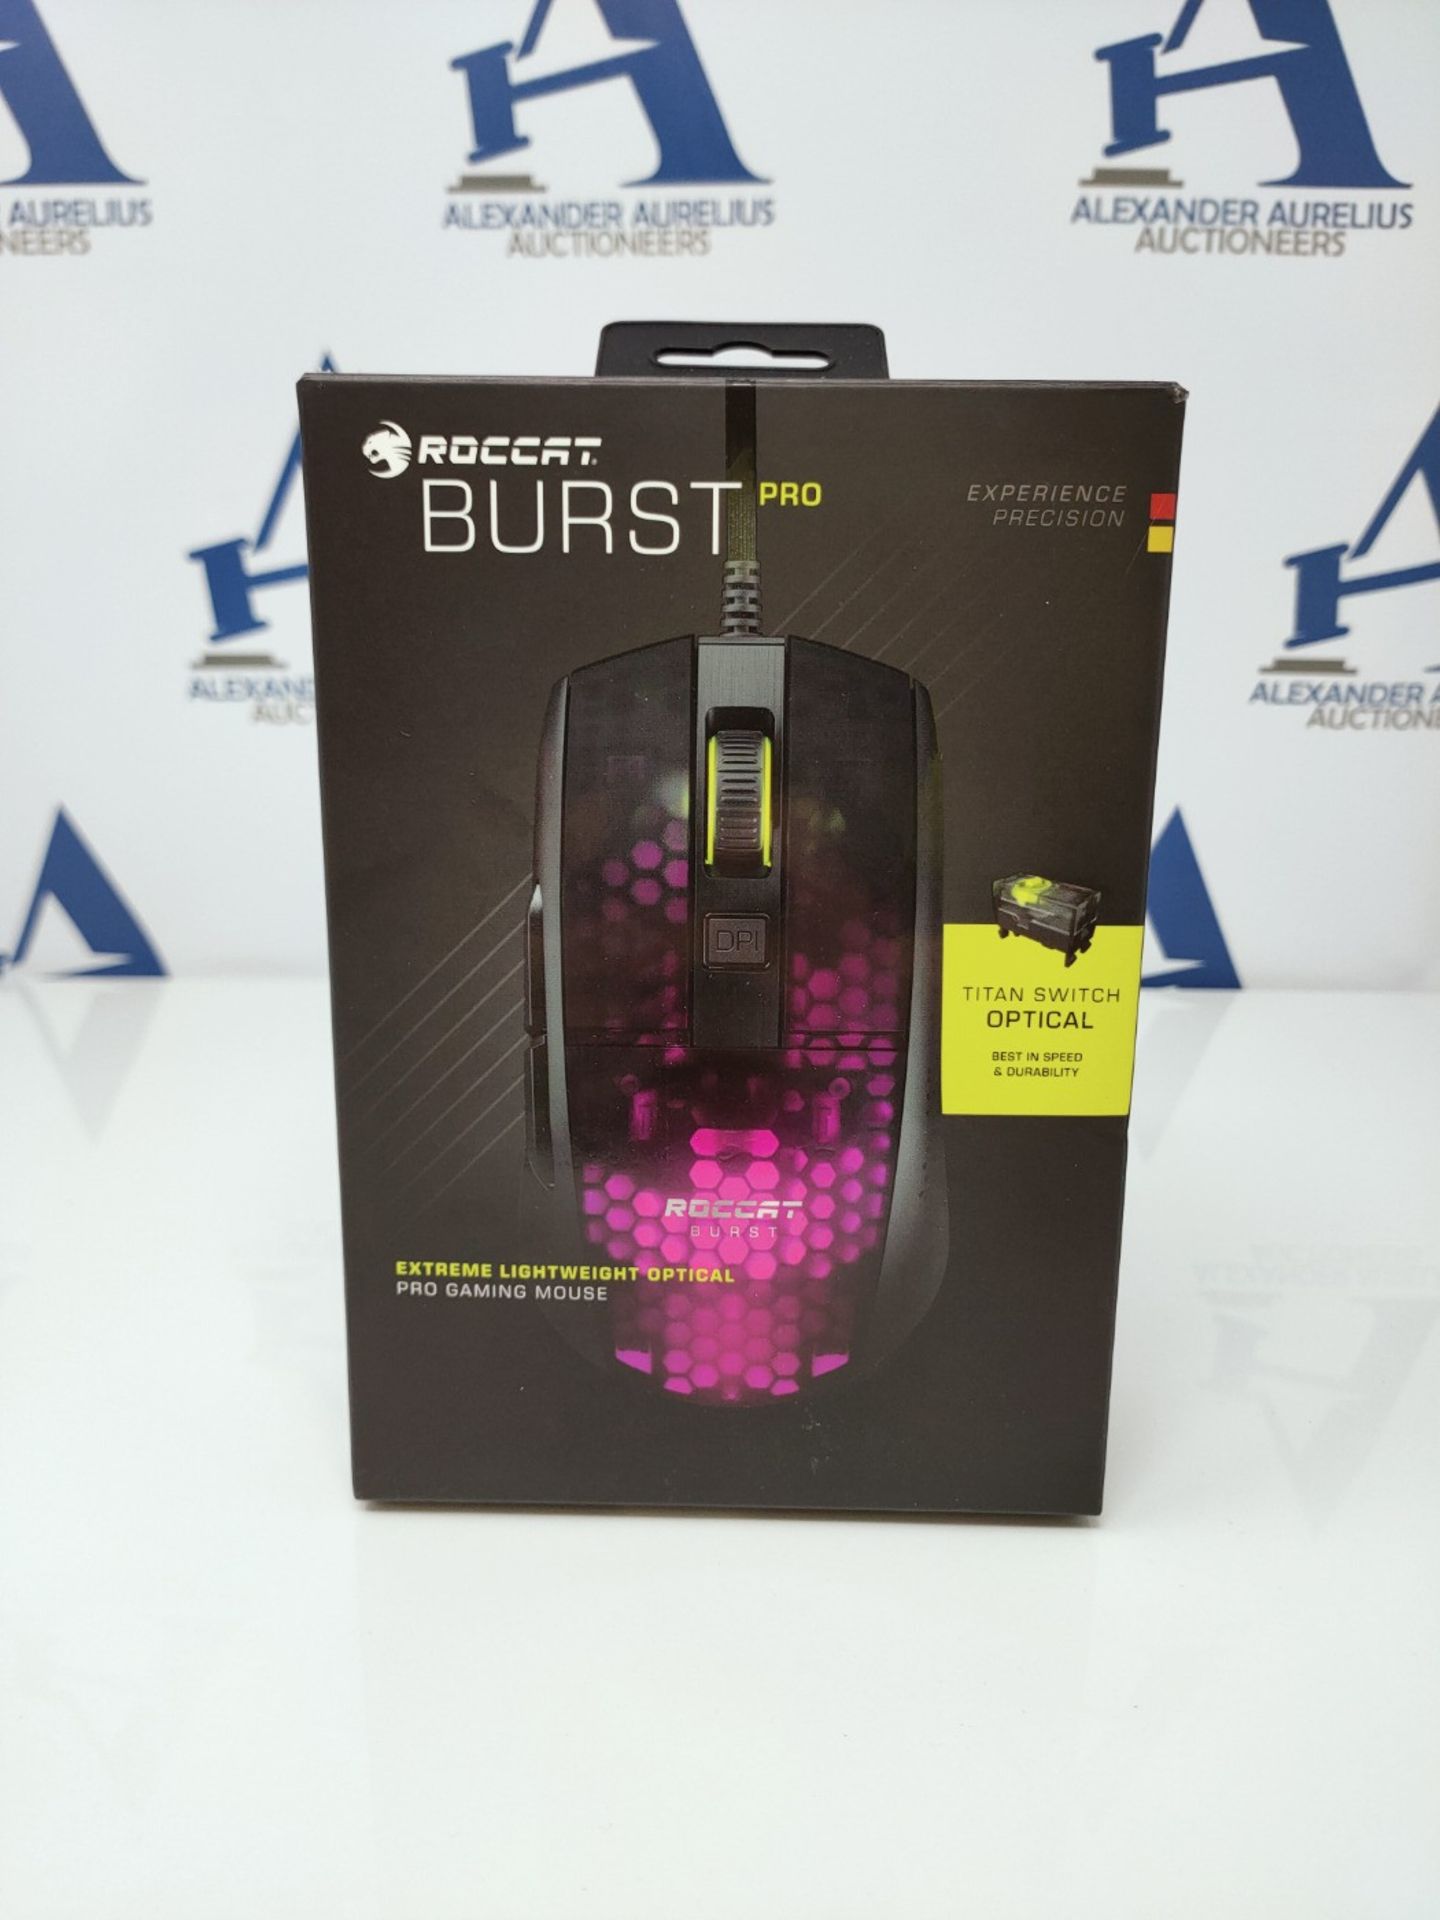 Roccat Burst Pro - Extreme Lightweight Optical Pro Gaming Mouse (high precision, optic - Image 2 of 3